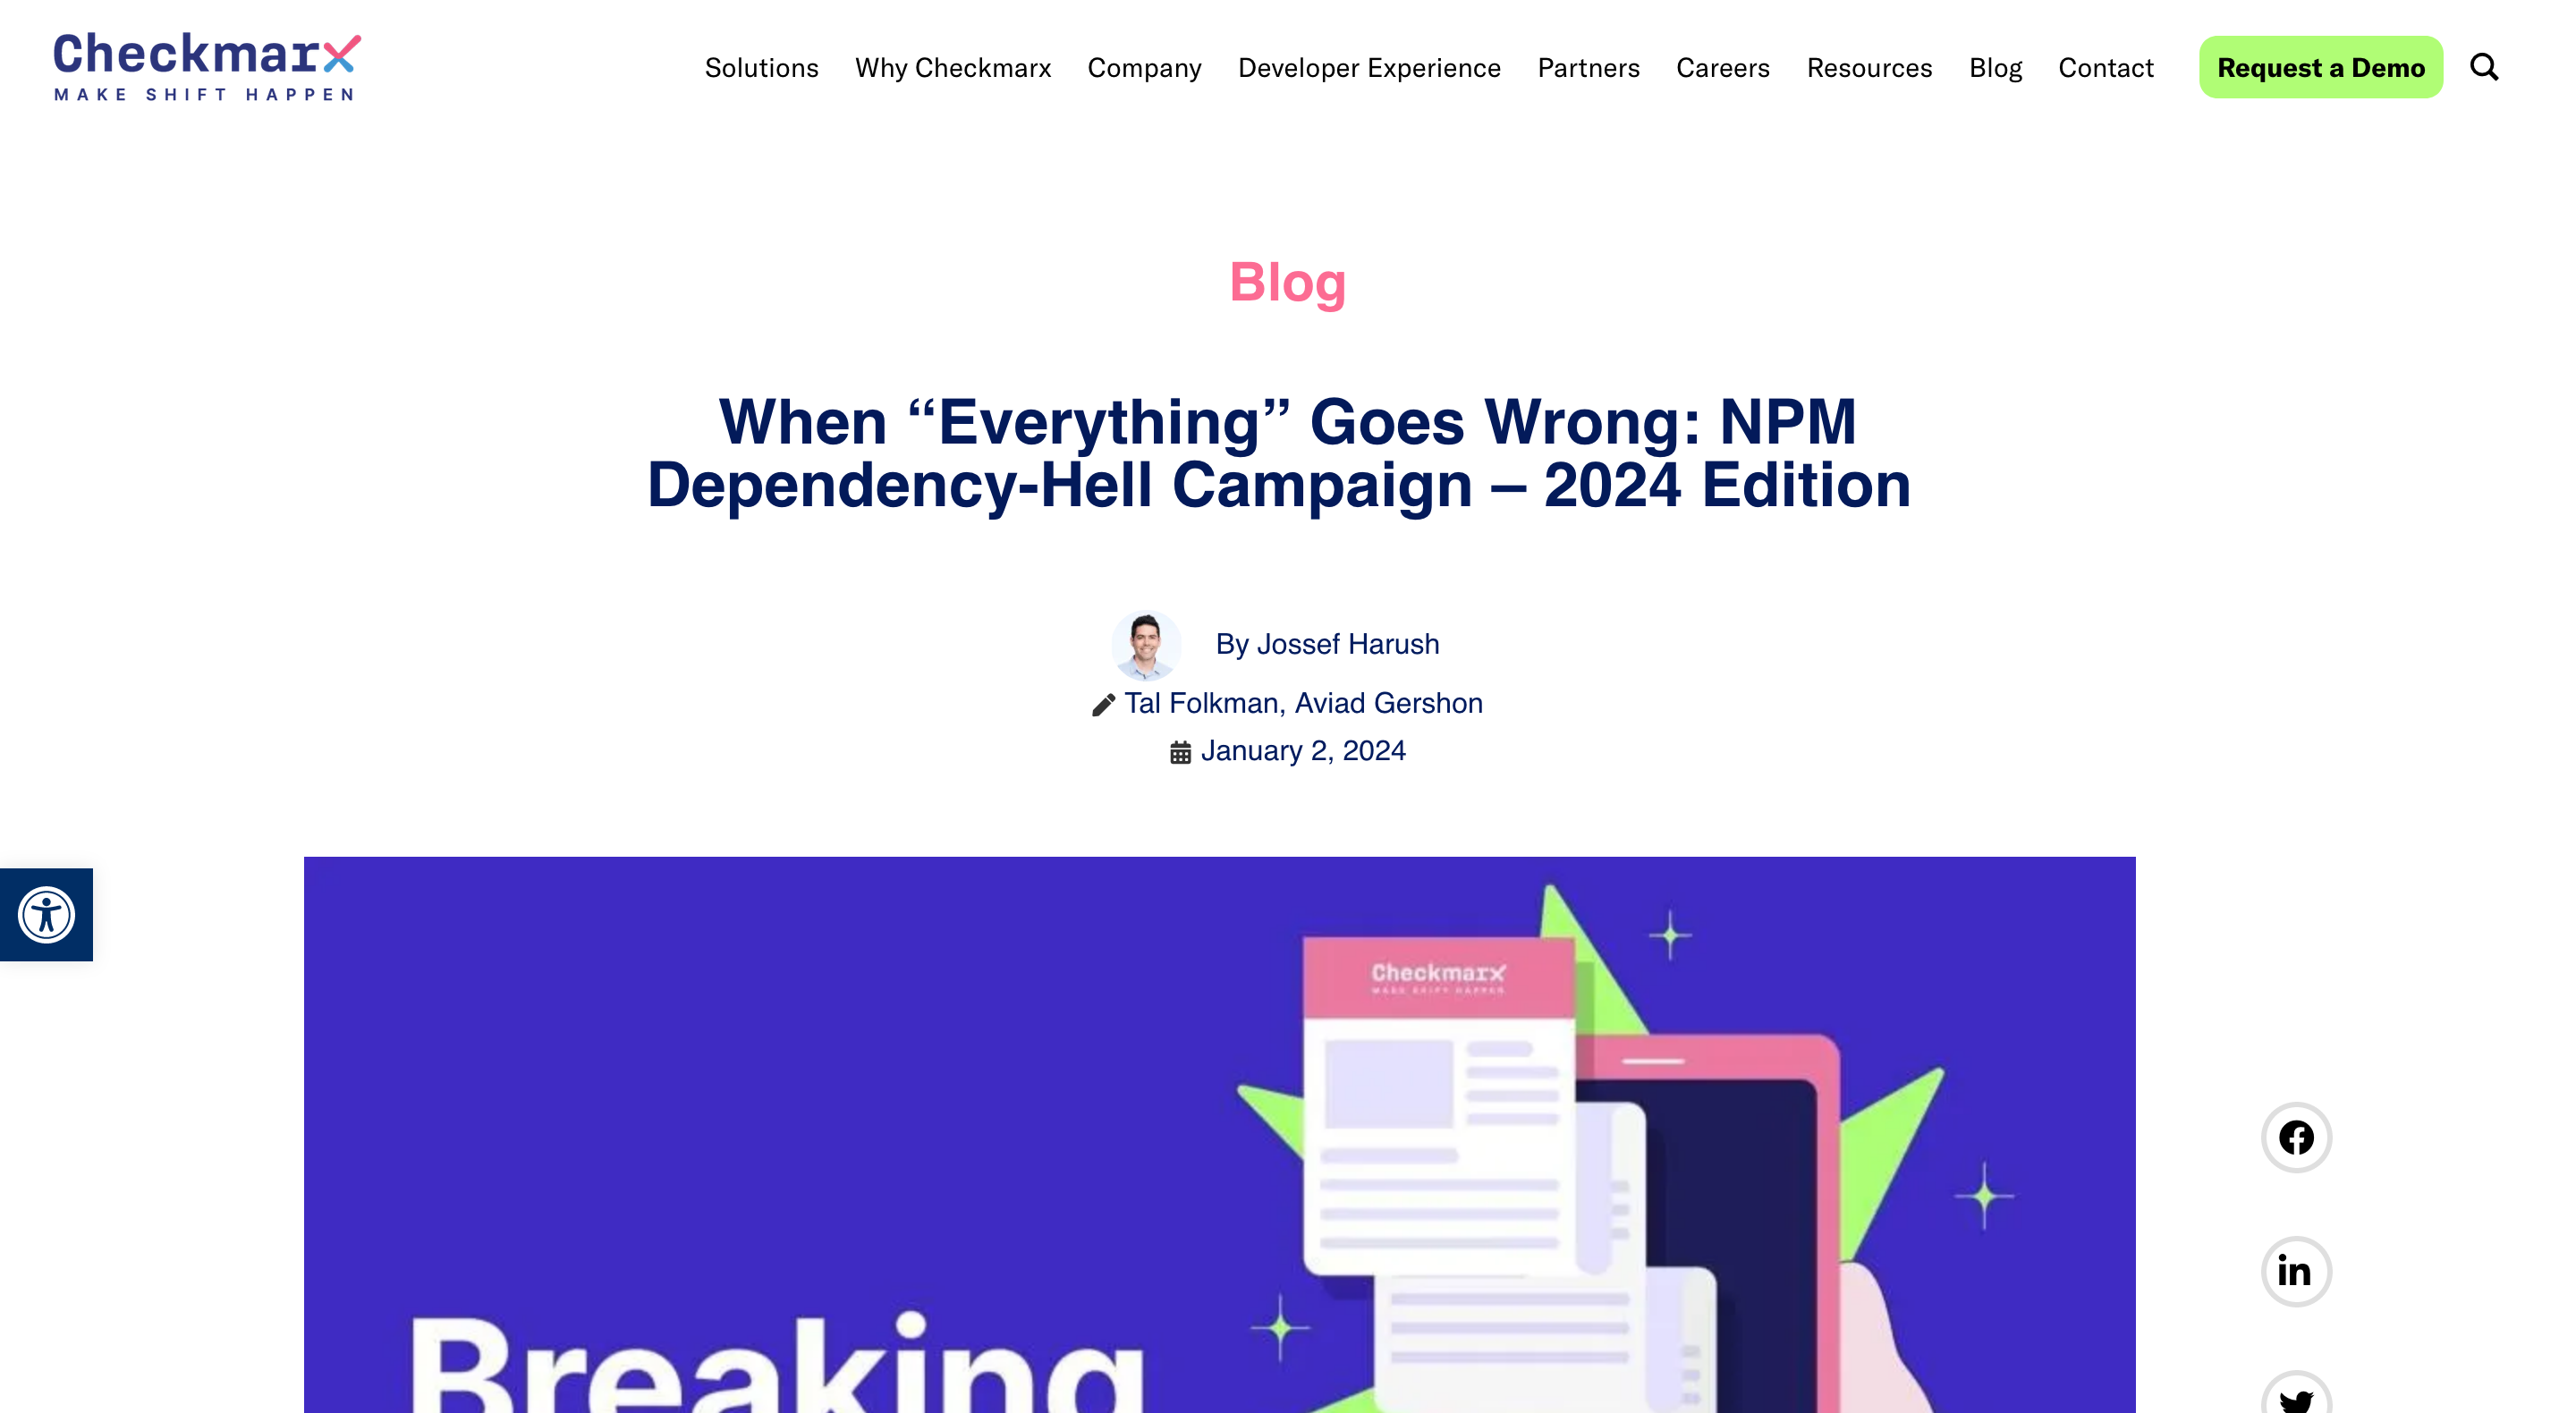 Screenshot of Checkmarx's article titled 'When Everything Goes Wrong: NPM Dependency-Hell Campaign - 2024 Edition'